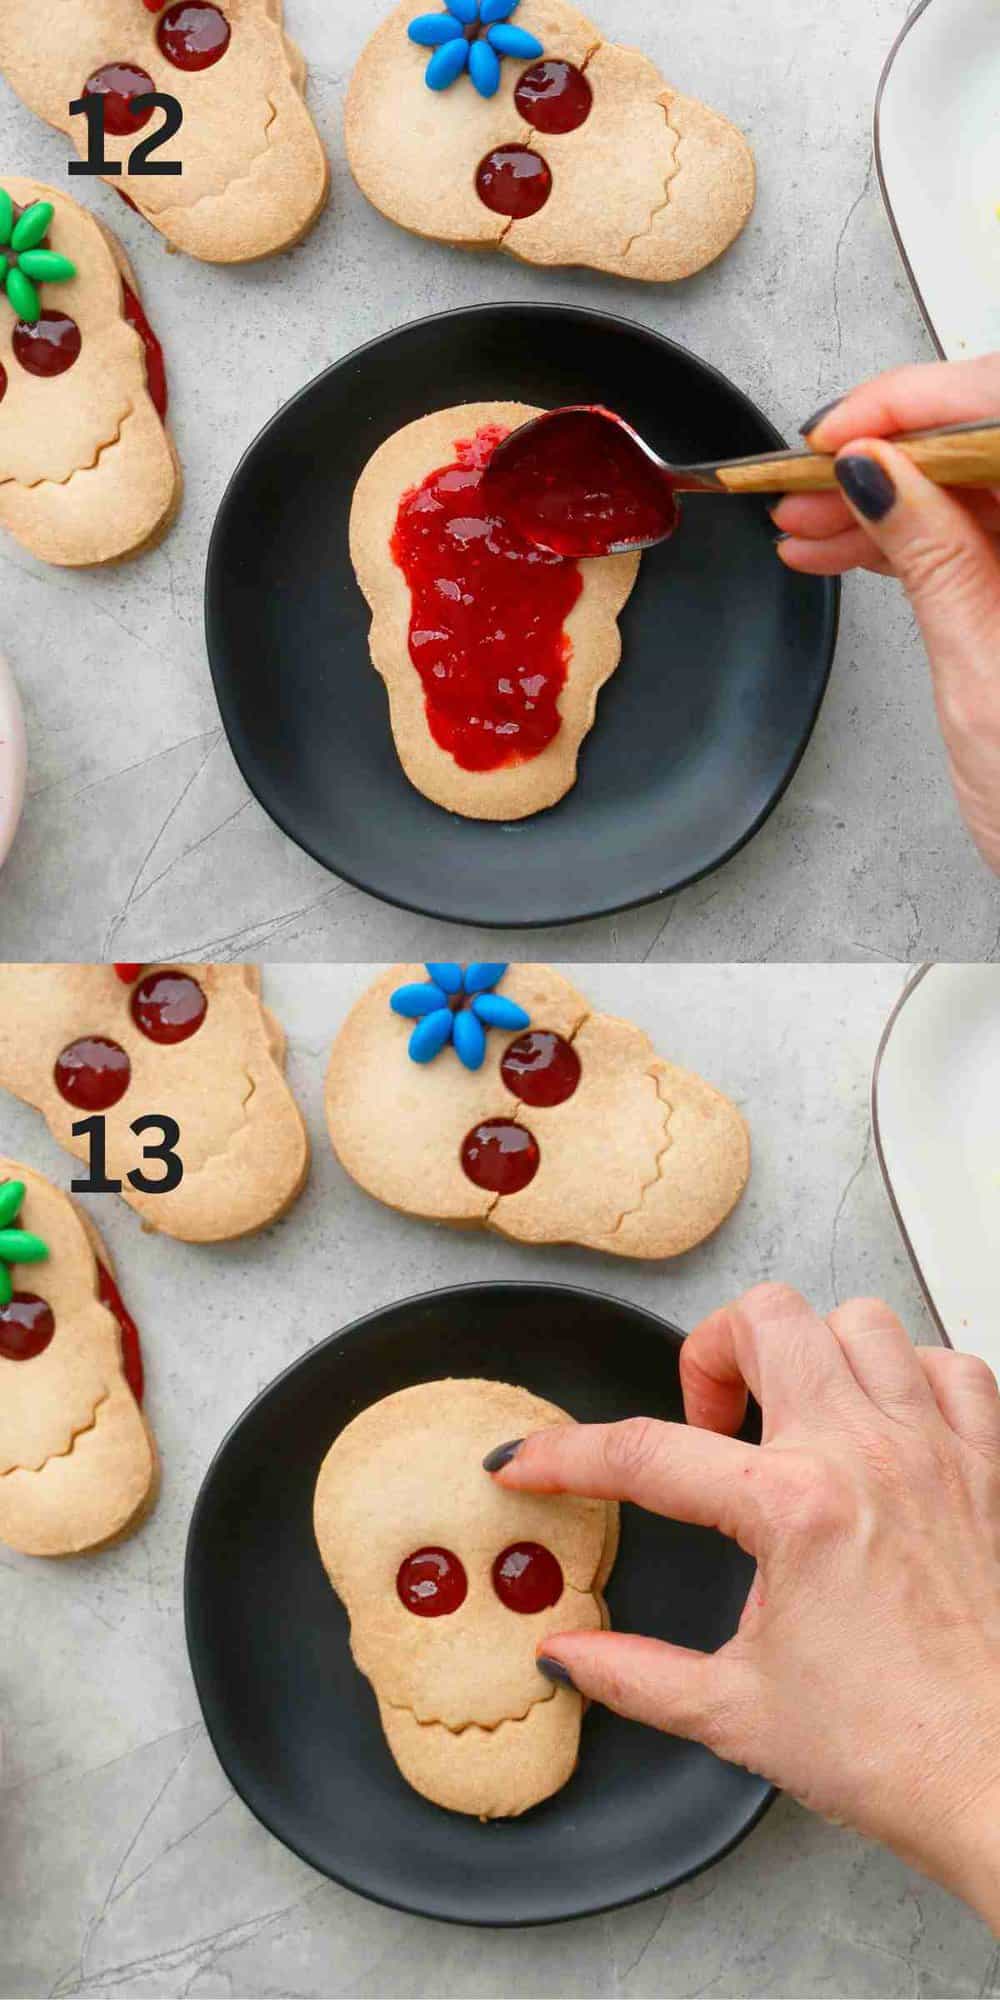 2 photo collage of spreading red jam on a skull shaped cookie.